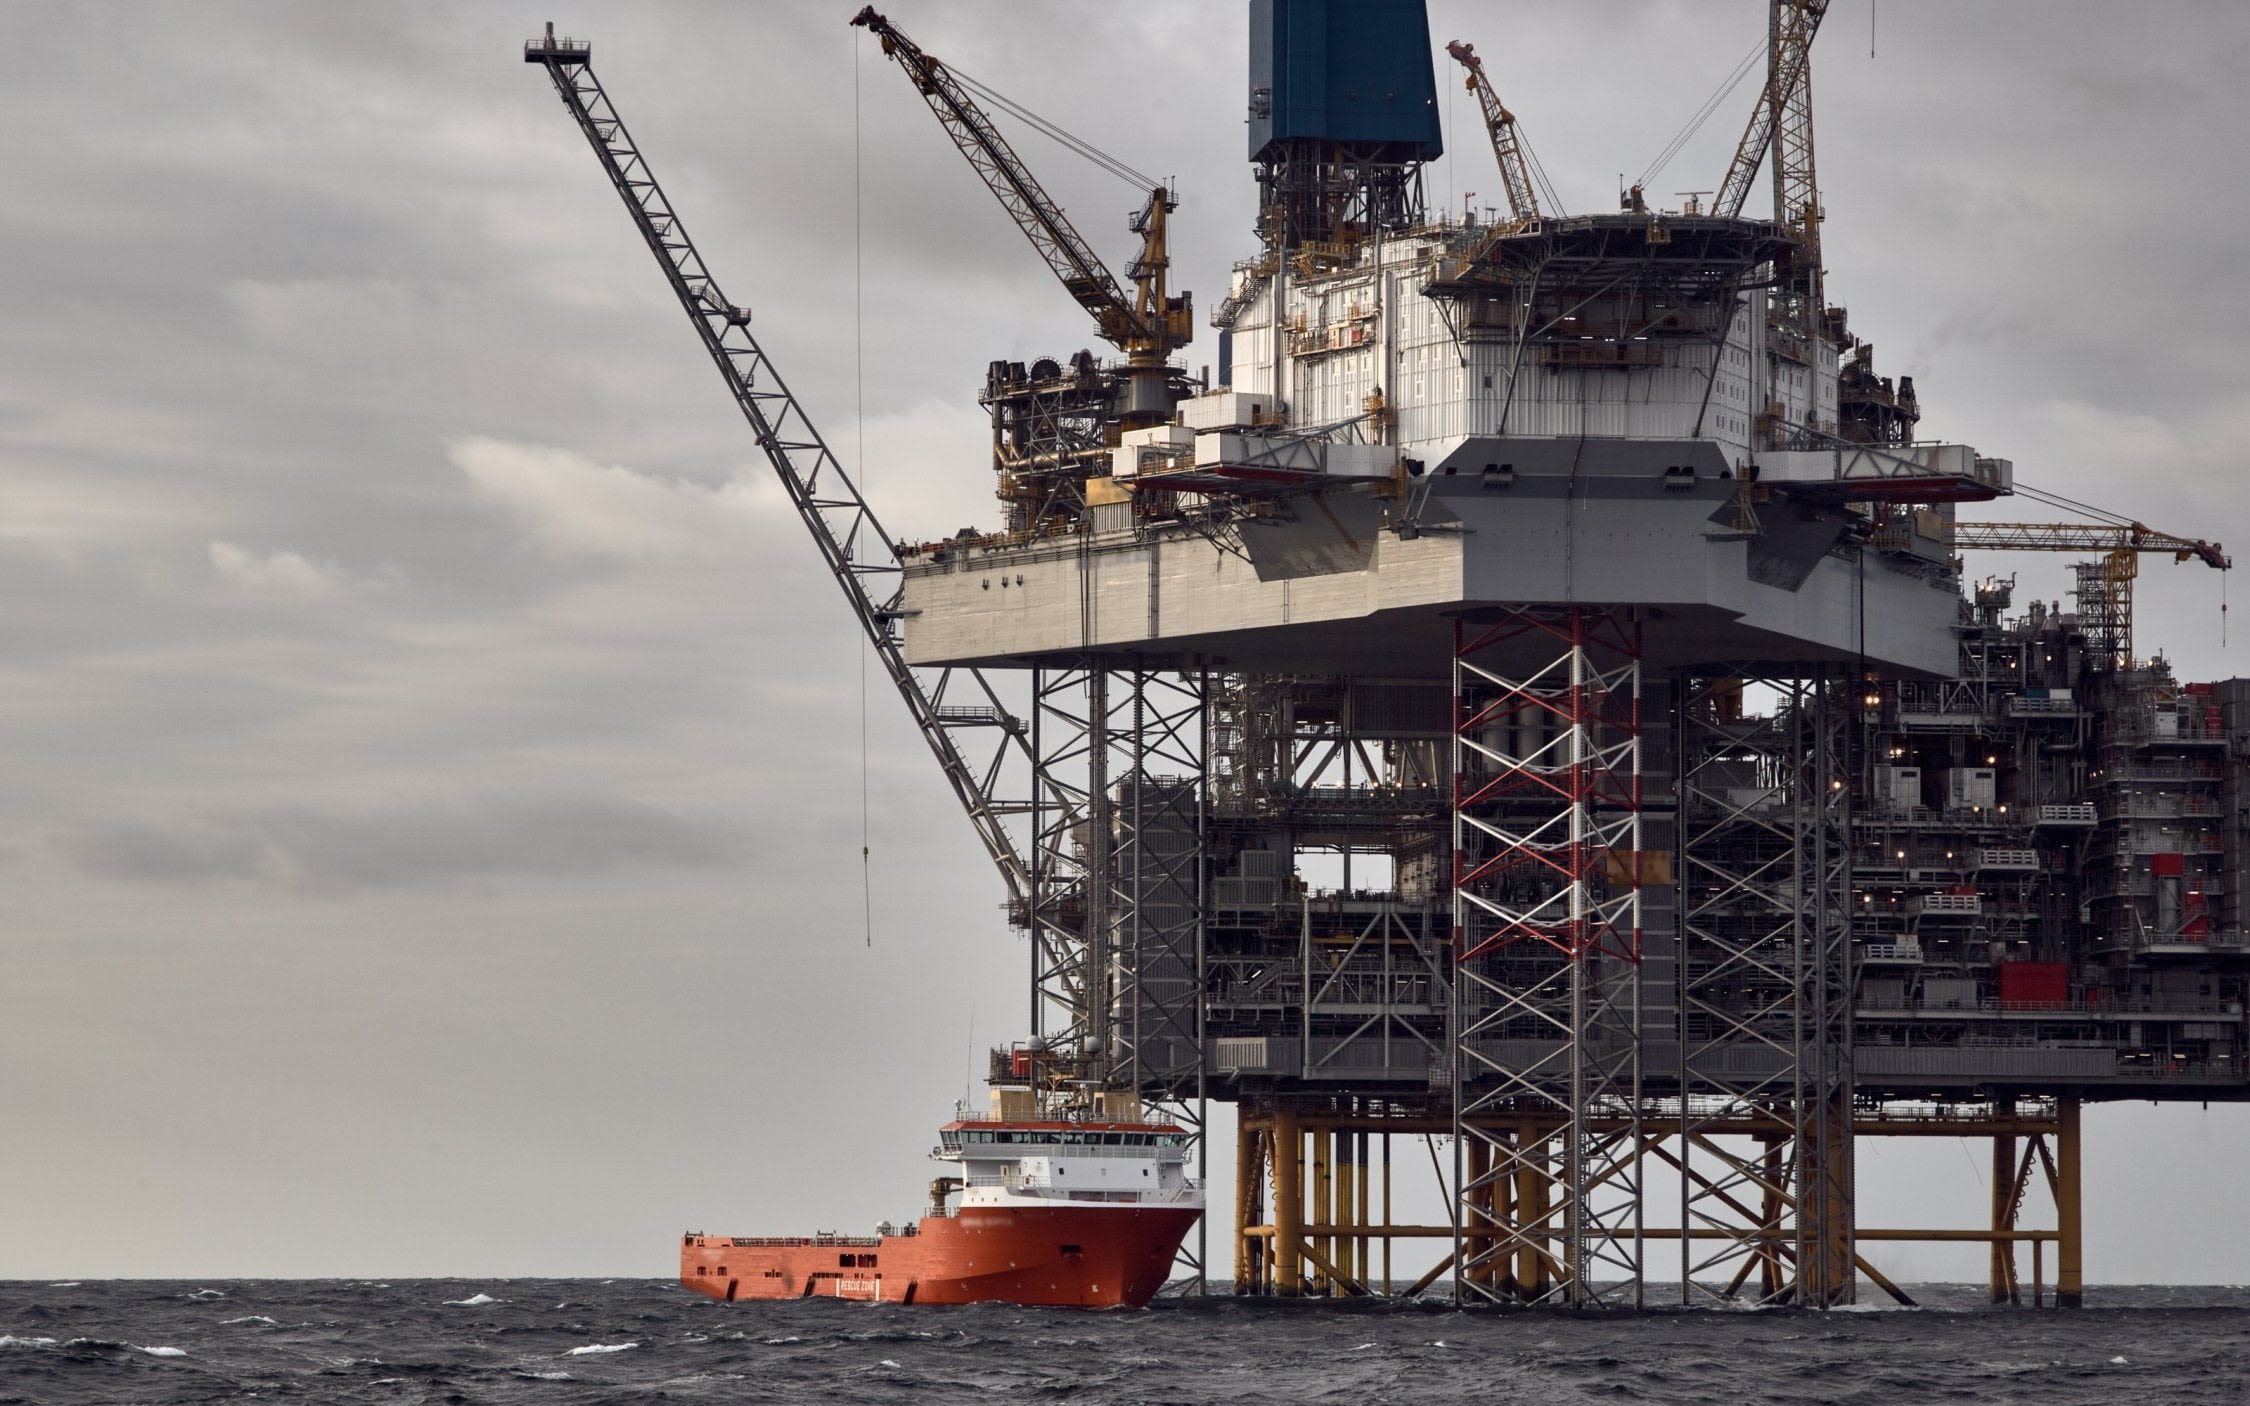 Oil rig workers stranded at sea after helicopter pilots go on strike